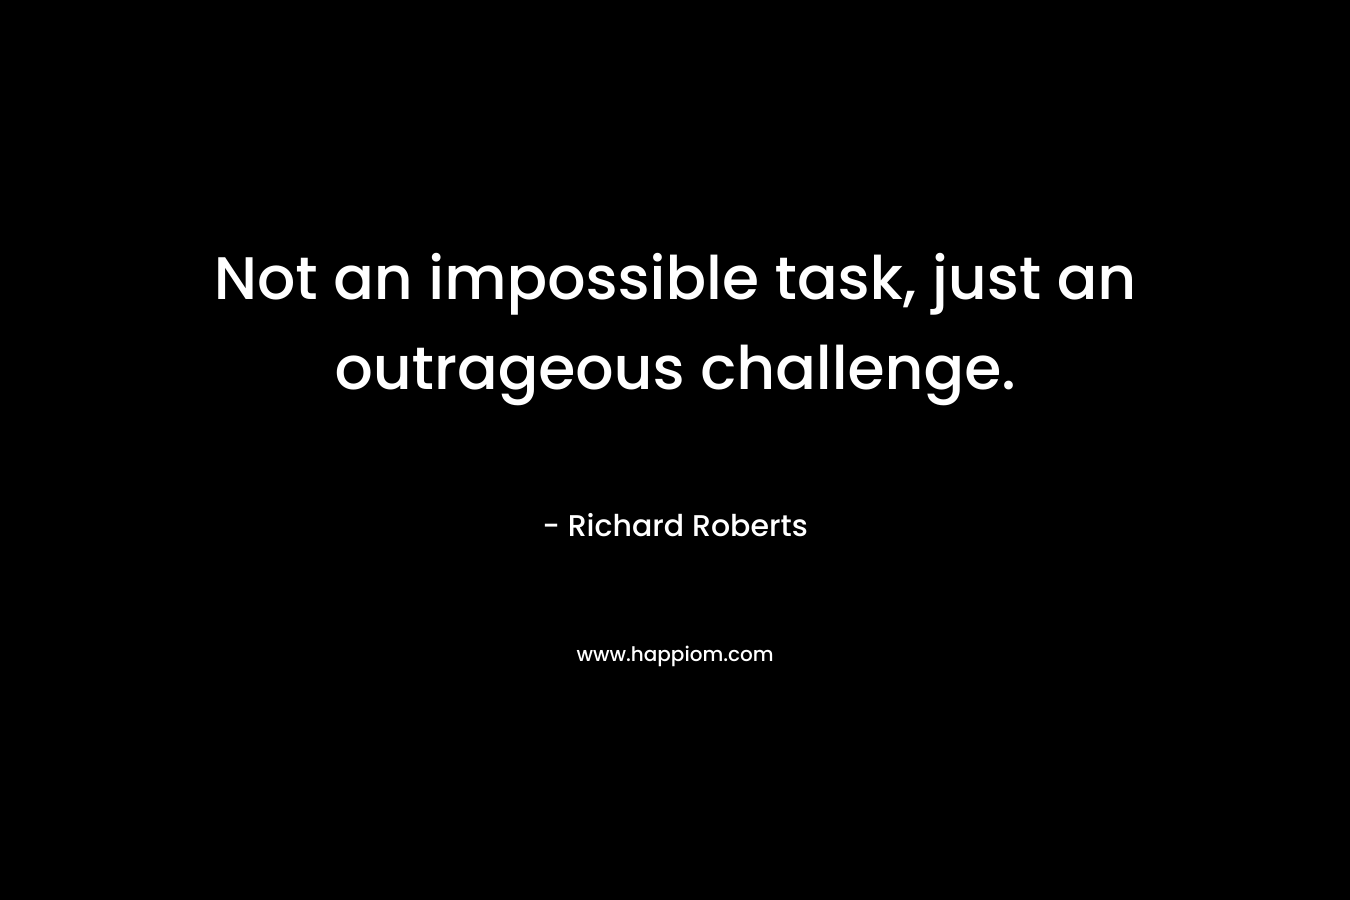 Not an impossible task, just an outrageous challenge.